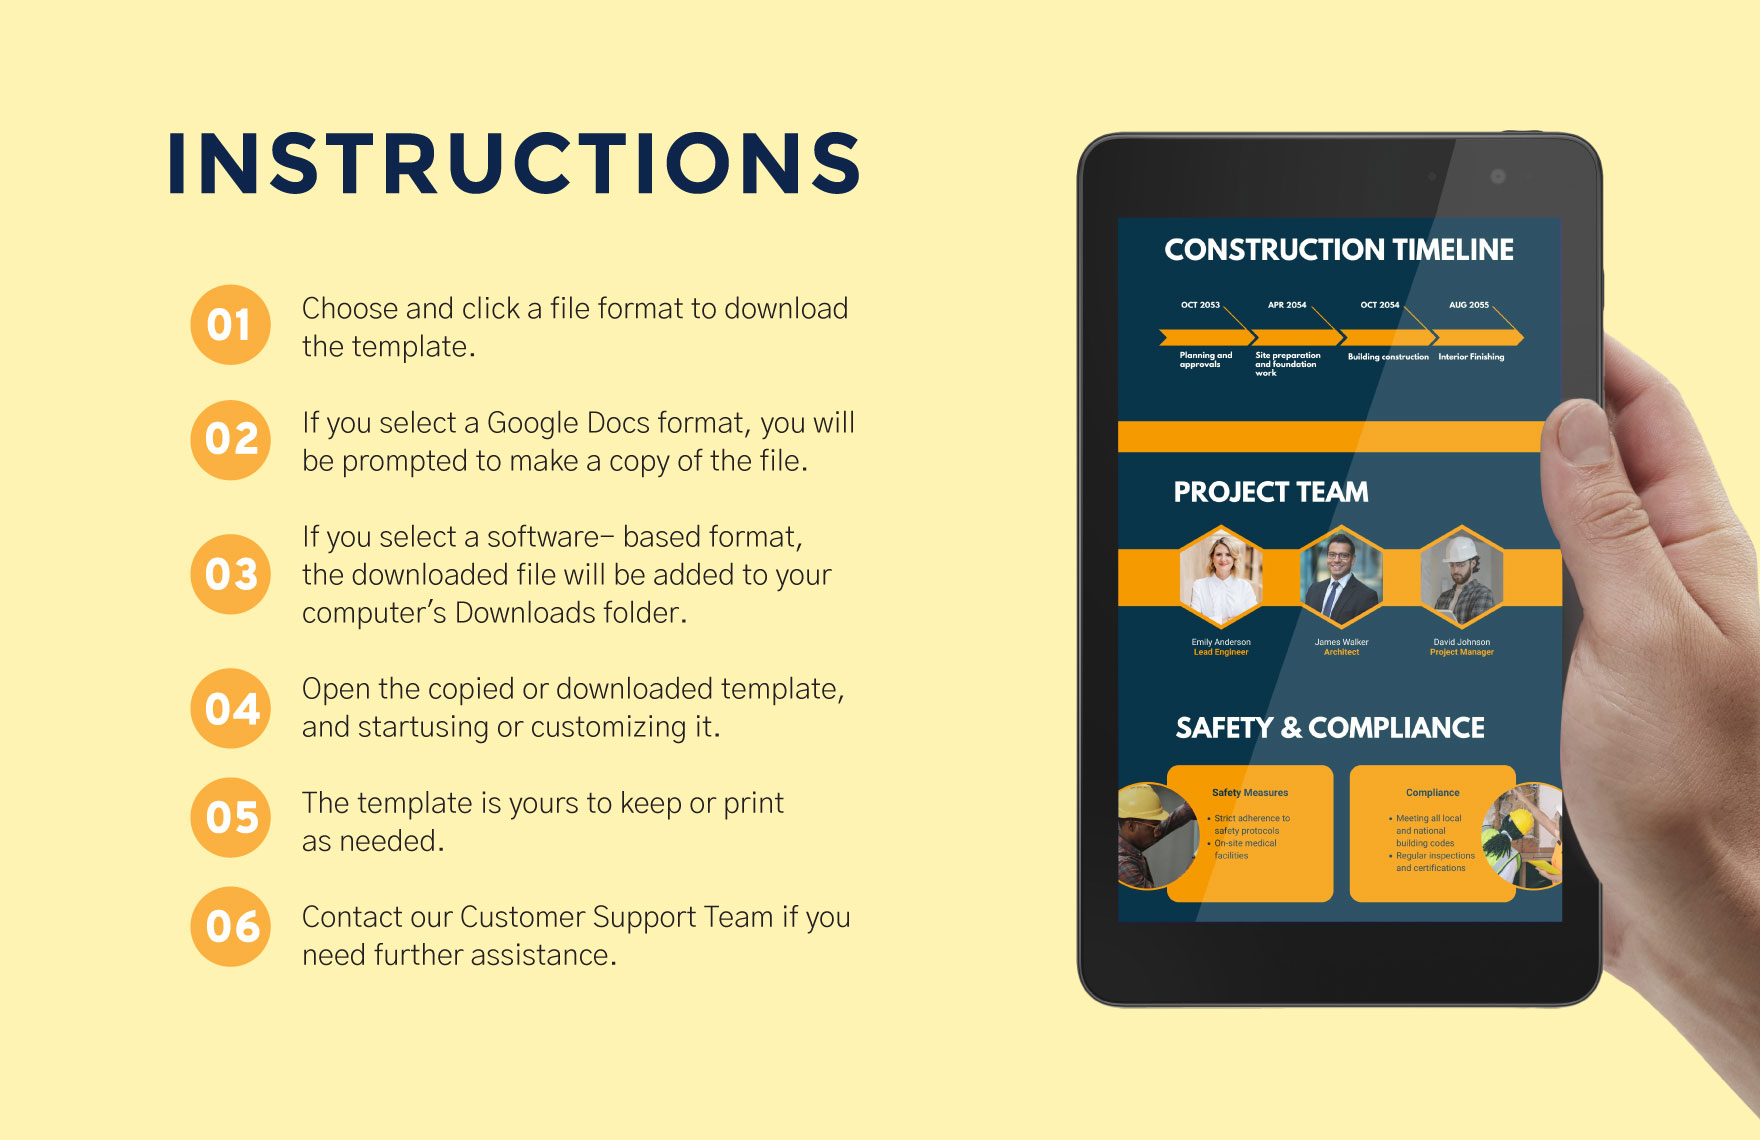 Building Construction Project Template